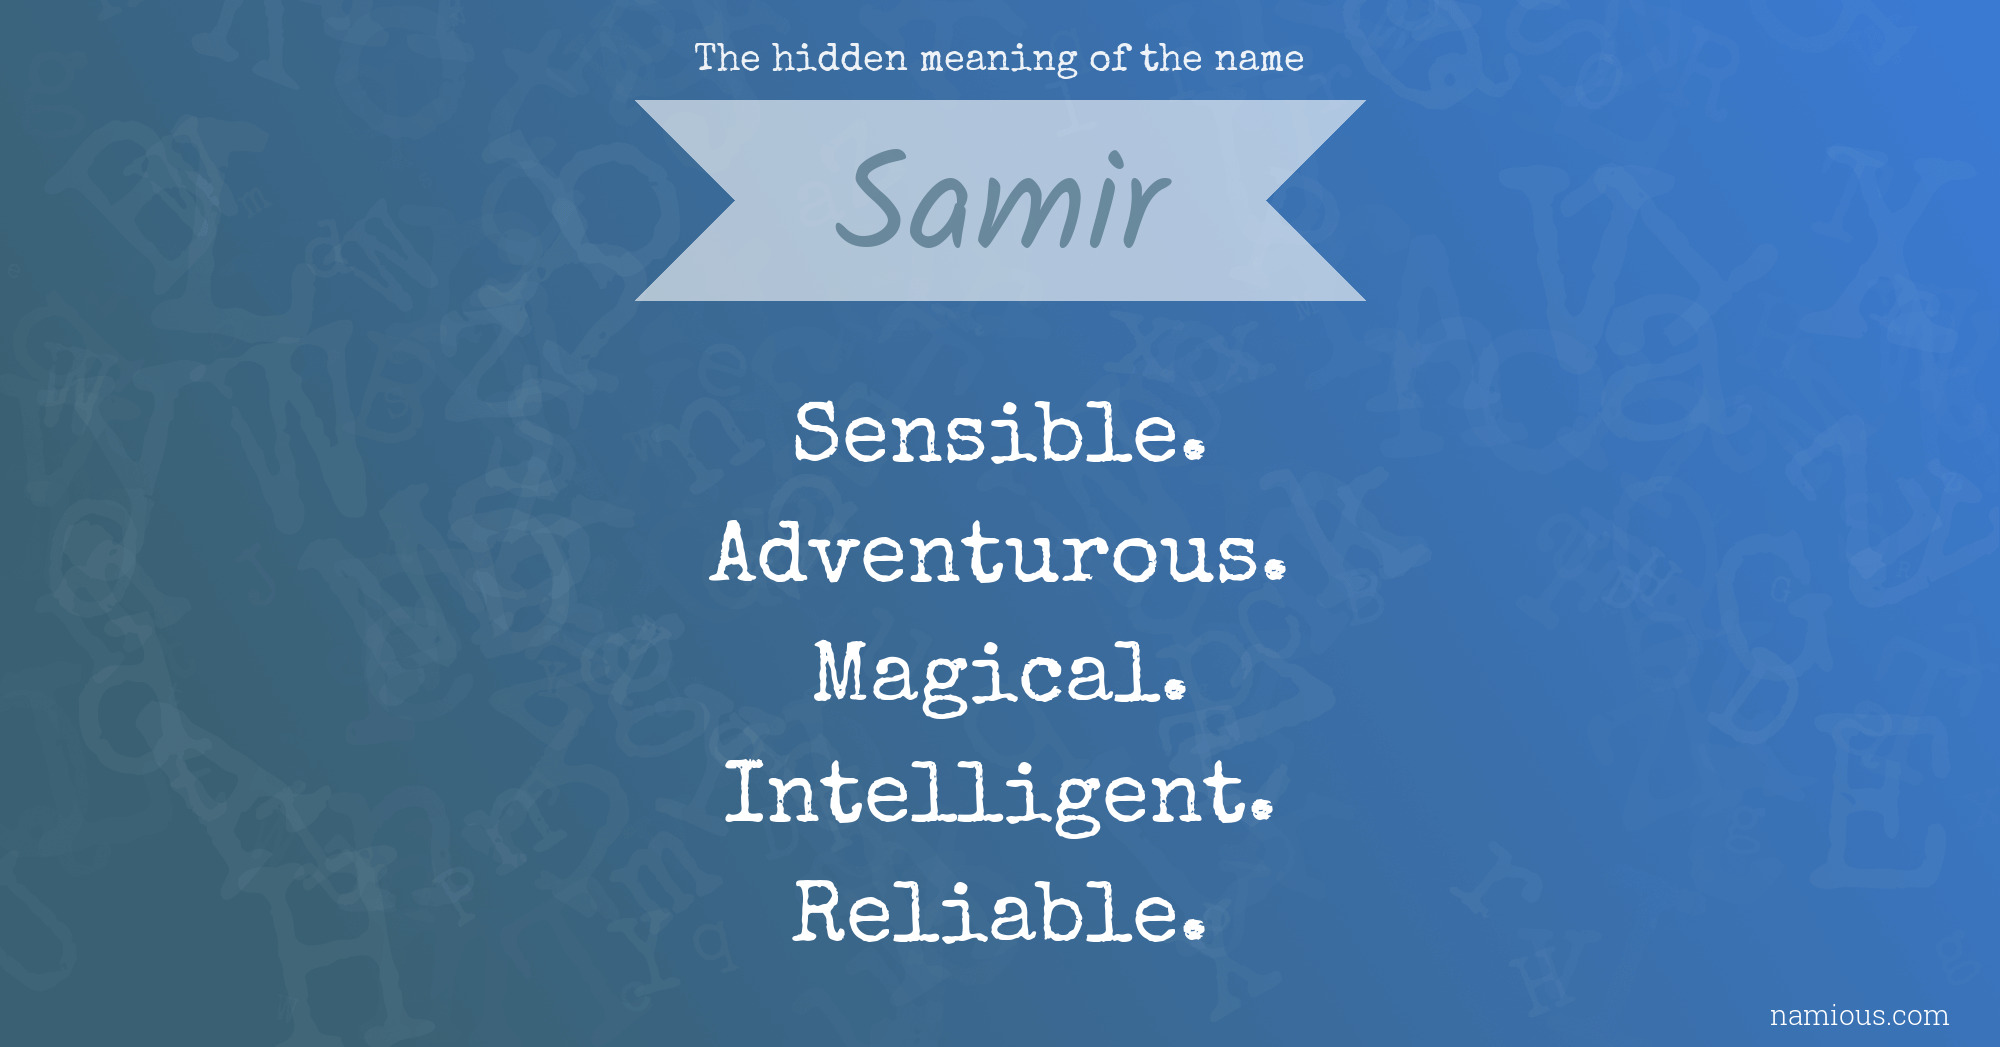 The hidden meaning of the name Samir